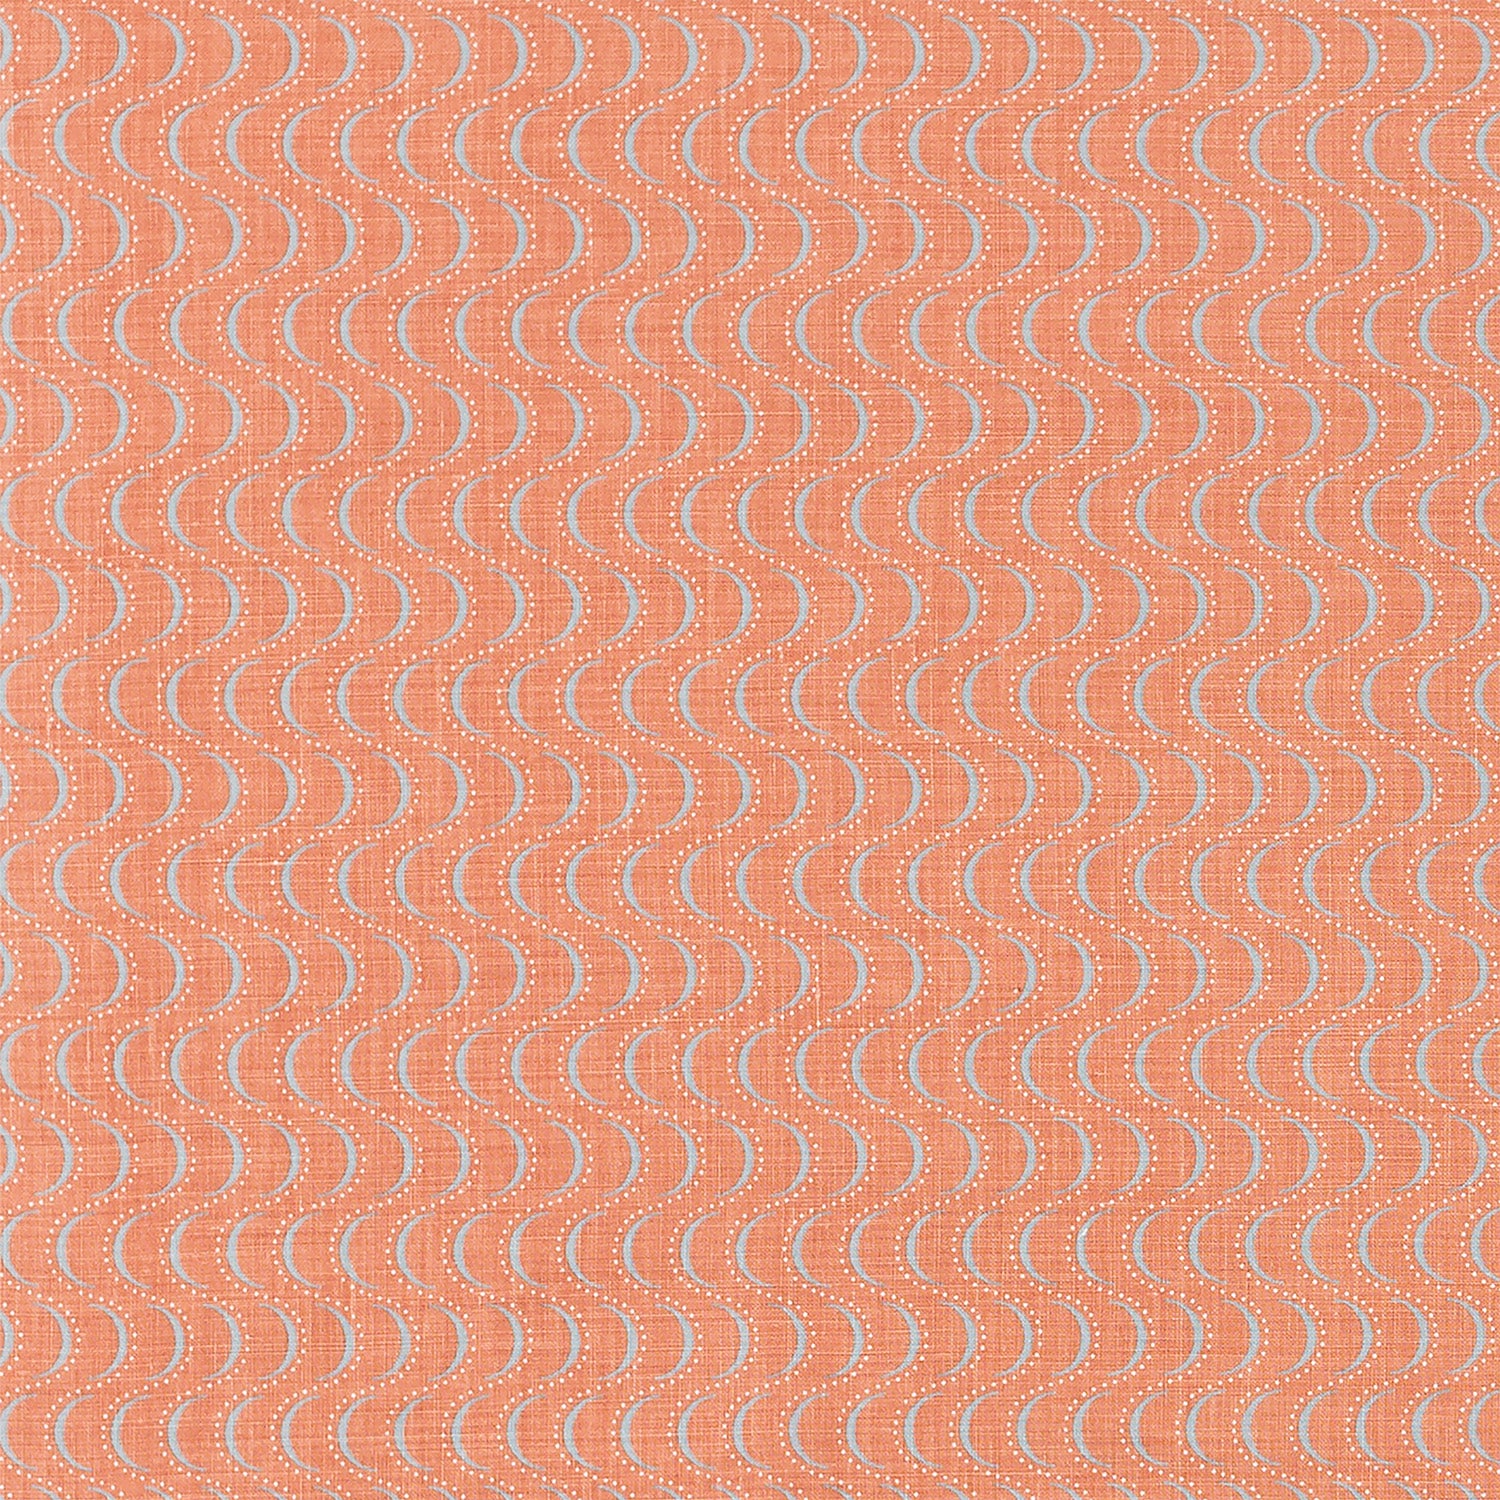 Fabric in an undulating stripe pattern in light blue and white on a coral field.